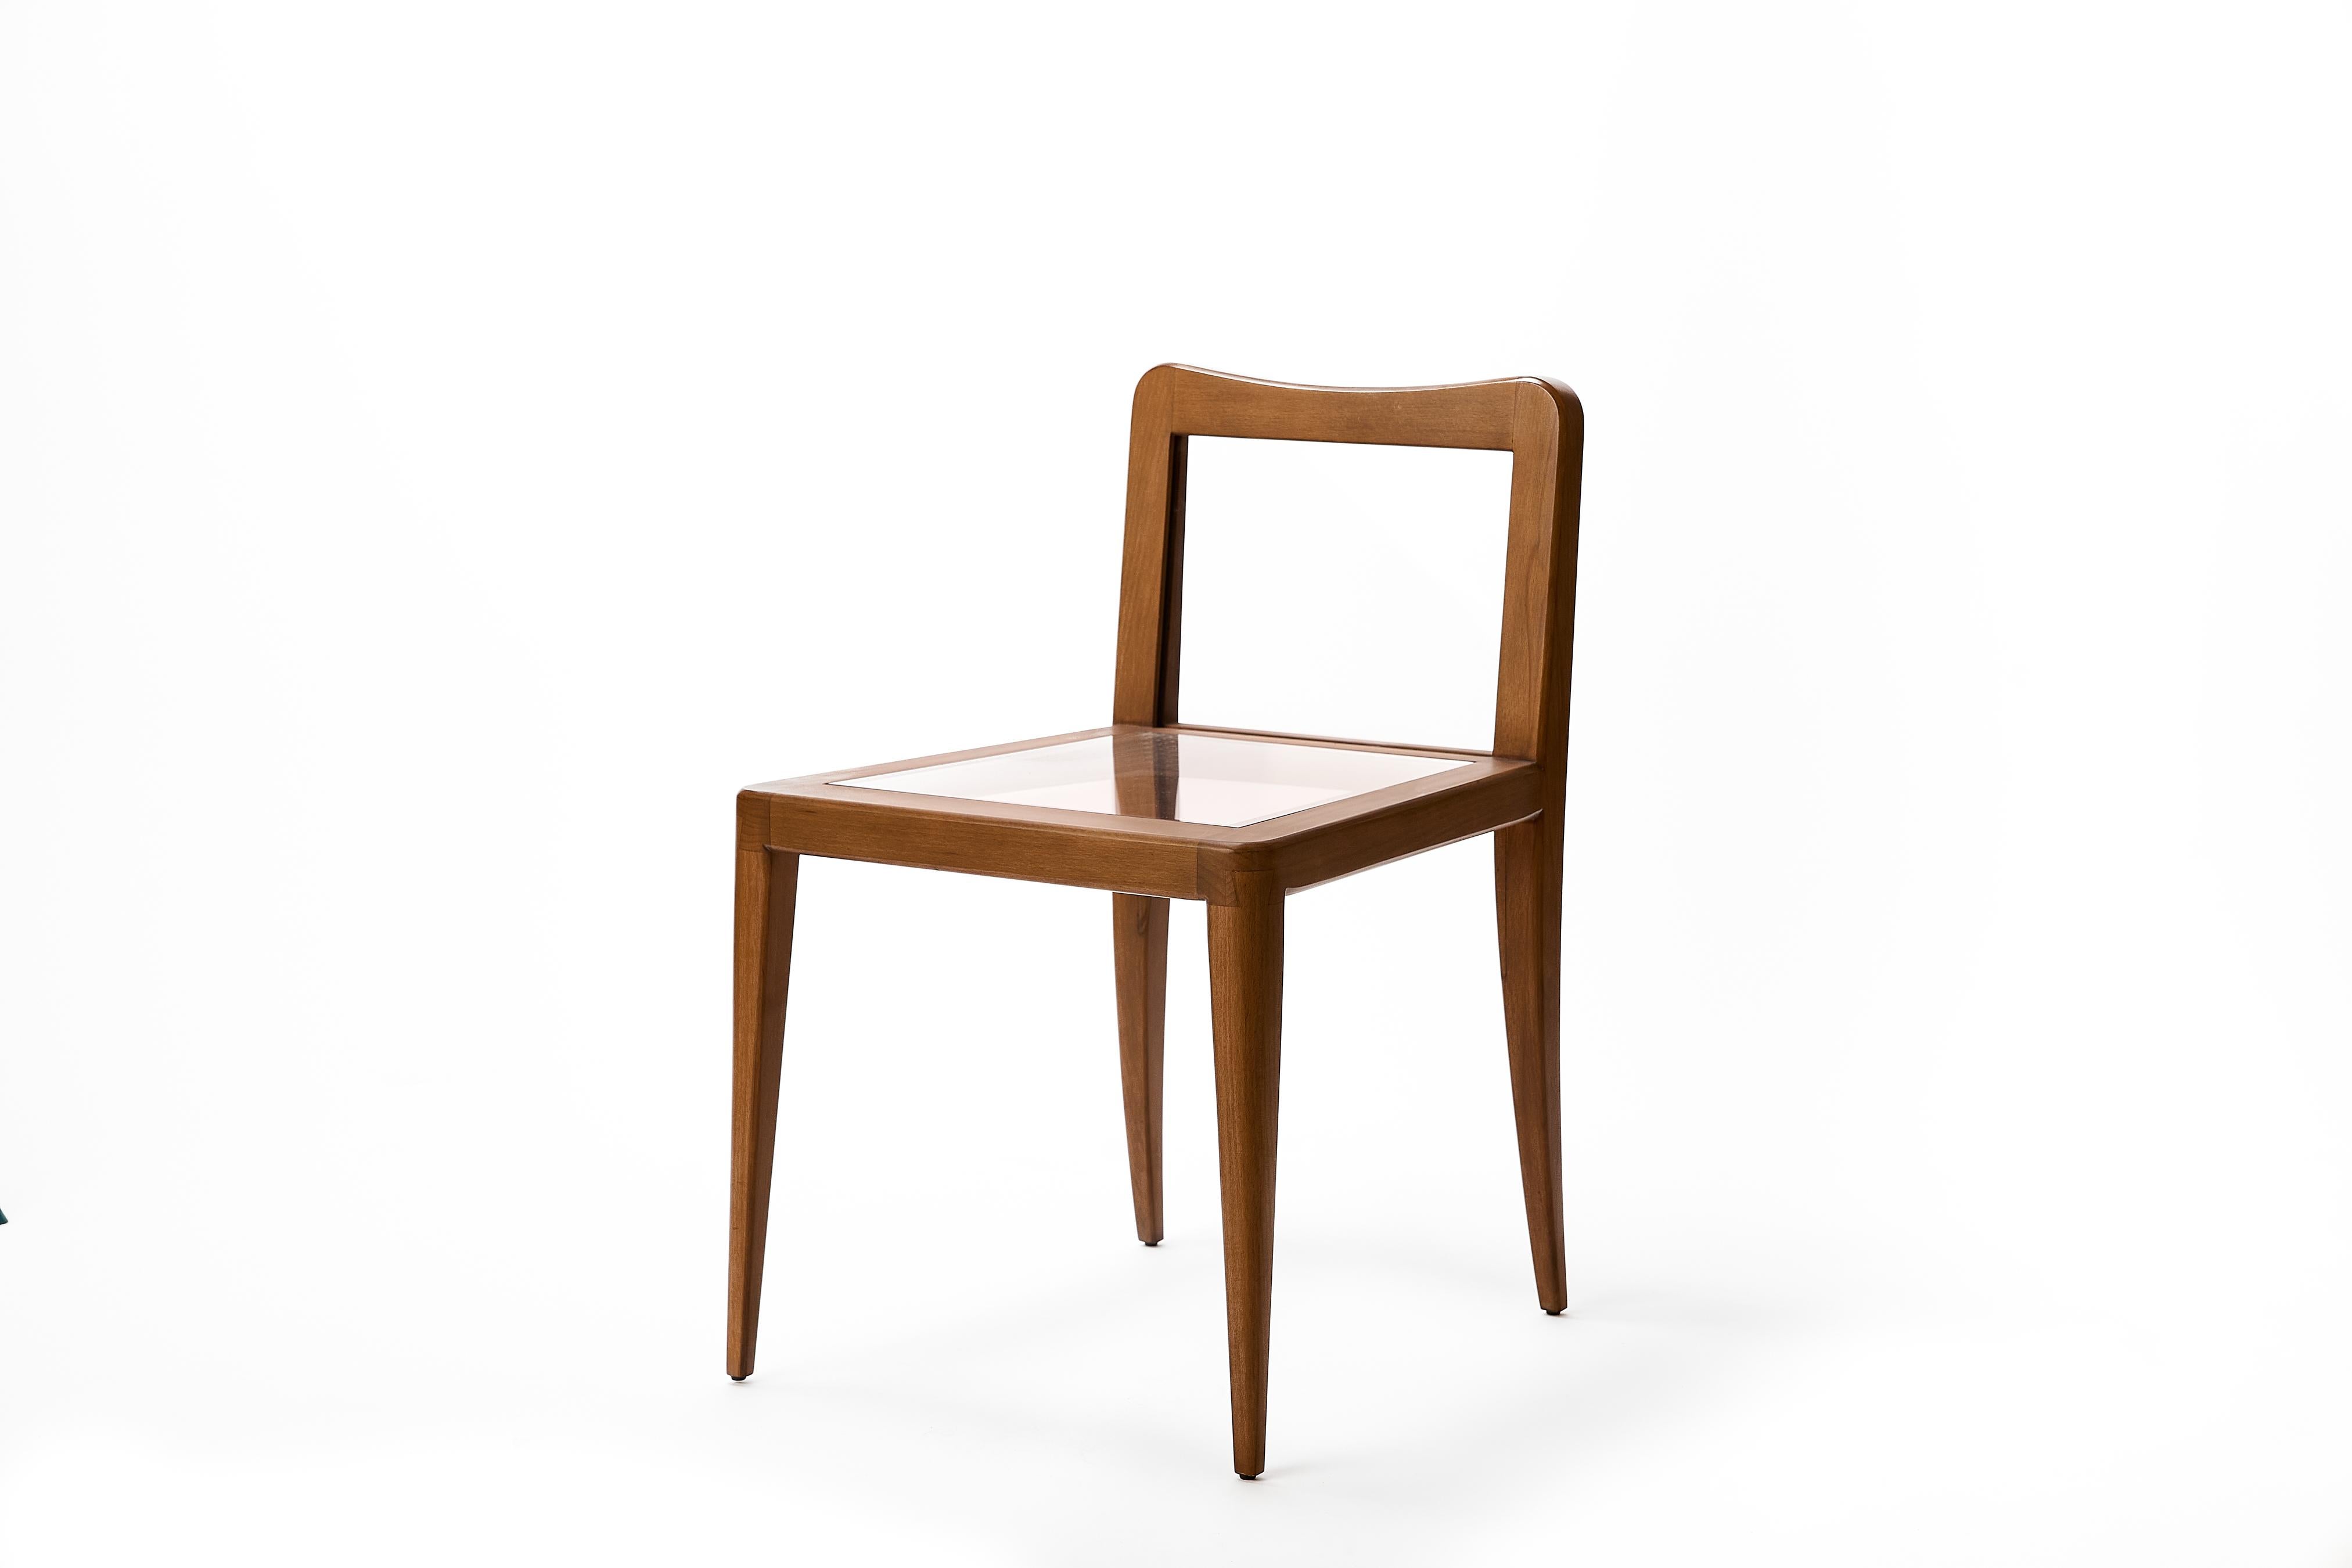 The Petite Wood Float Chair blurs the lines between art and furniture and encourages an internal dialogue with the viewer. Is this art or can I sit in it? Both. Handcrafted from solid walnut, the wide and angular lounge-like frame includes a